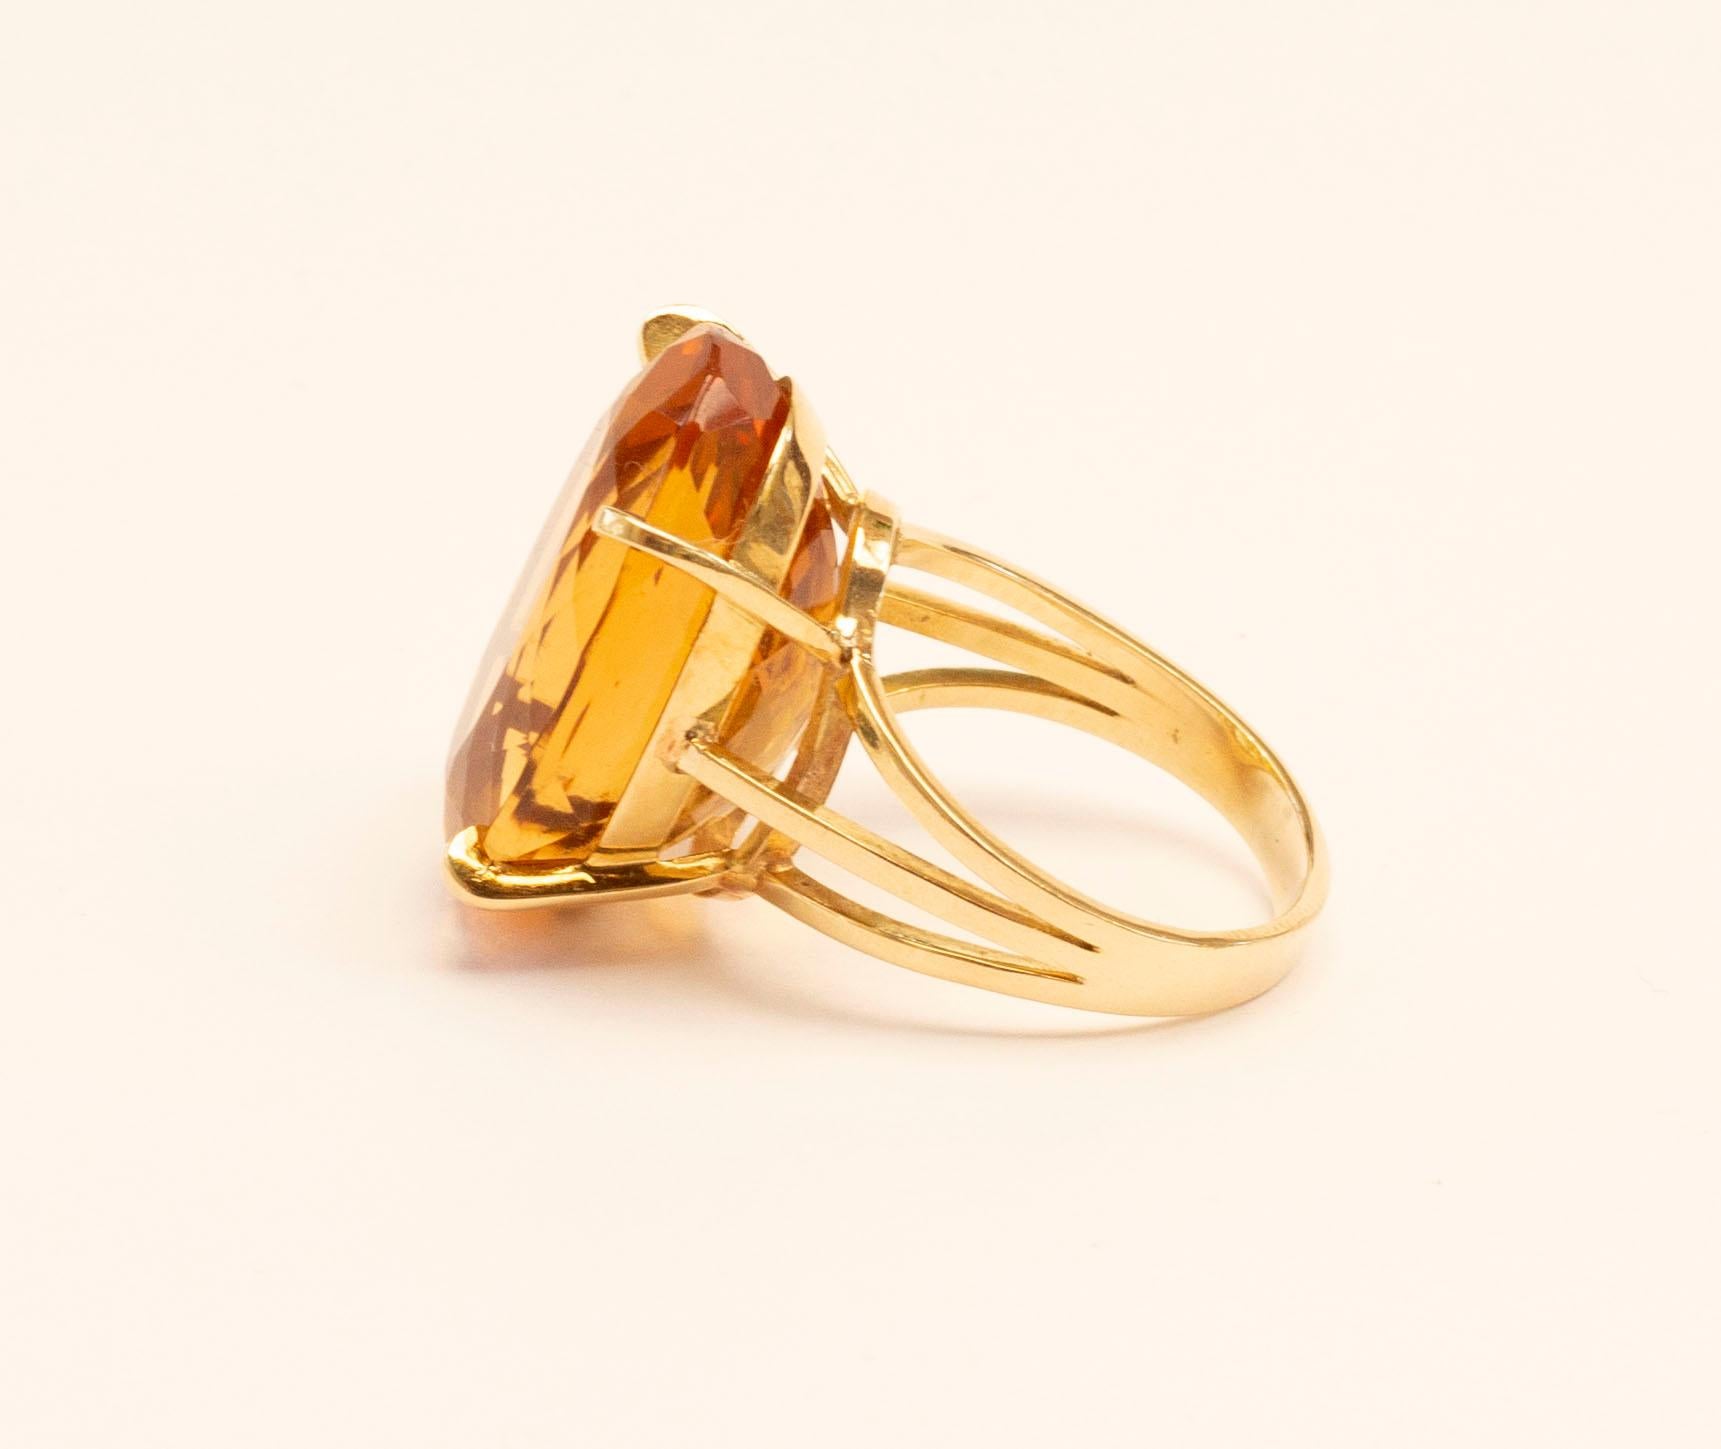 A vintage (1970s) 18 Karat yellow gold cocktail ring with a large oval brilliant cut citrine in a classic yellow gold mount. The ring is not marked for the gold content and the manufacturer's name. The ring was professionally tested for the gold